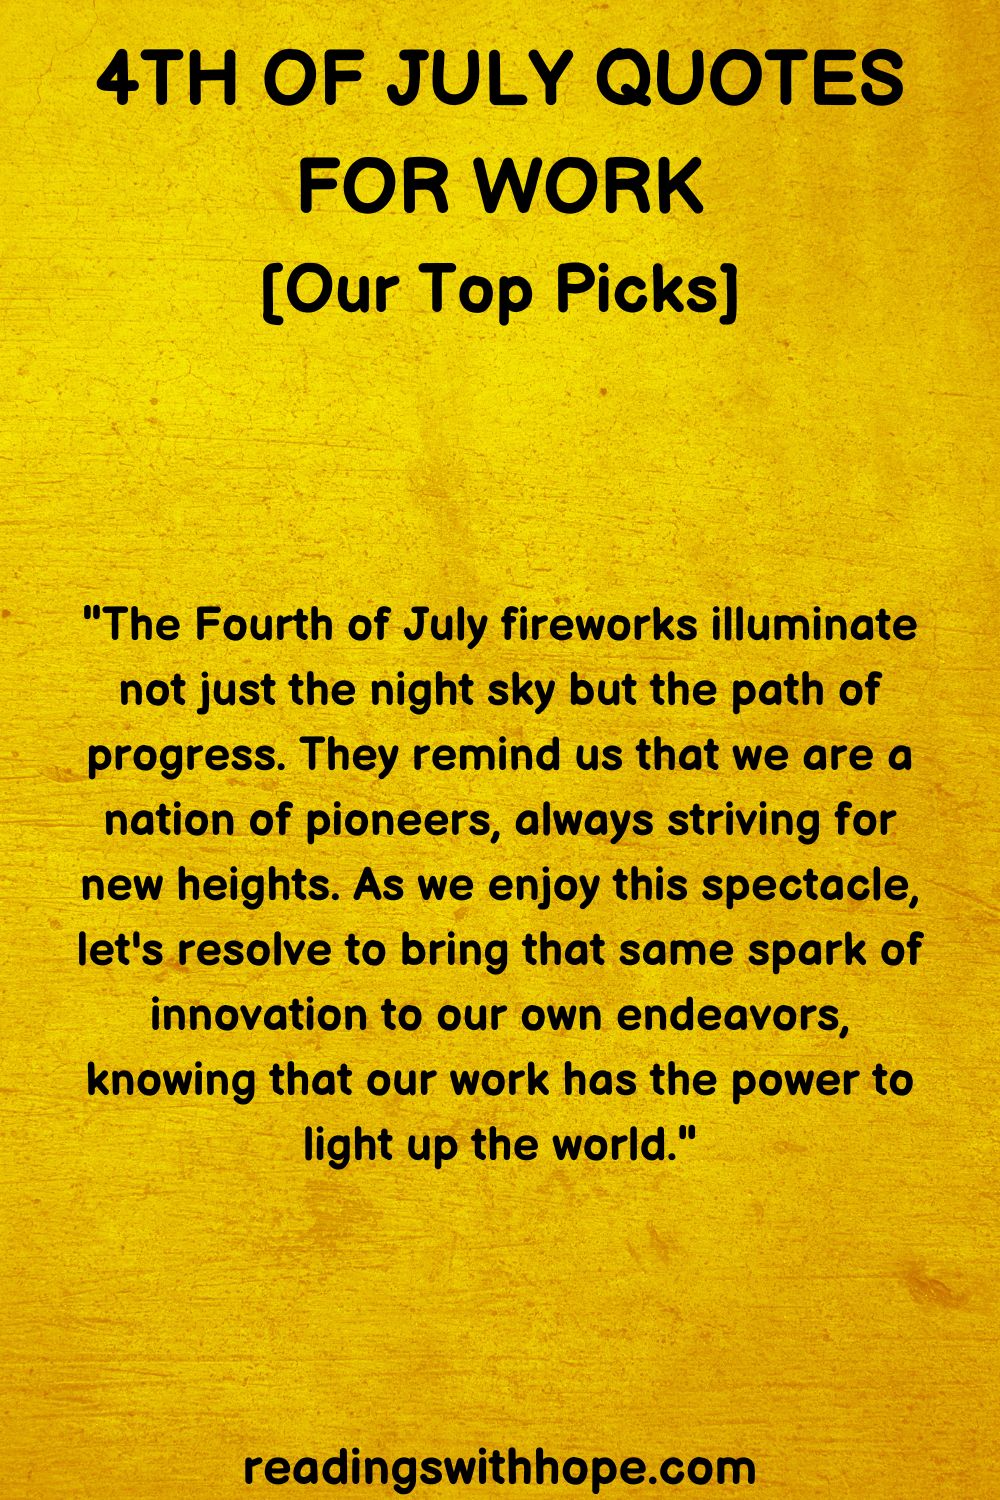 4th of July Quotes For Work